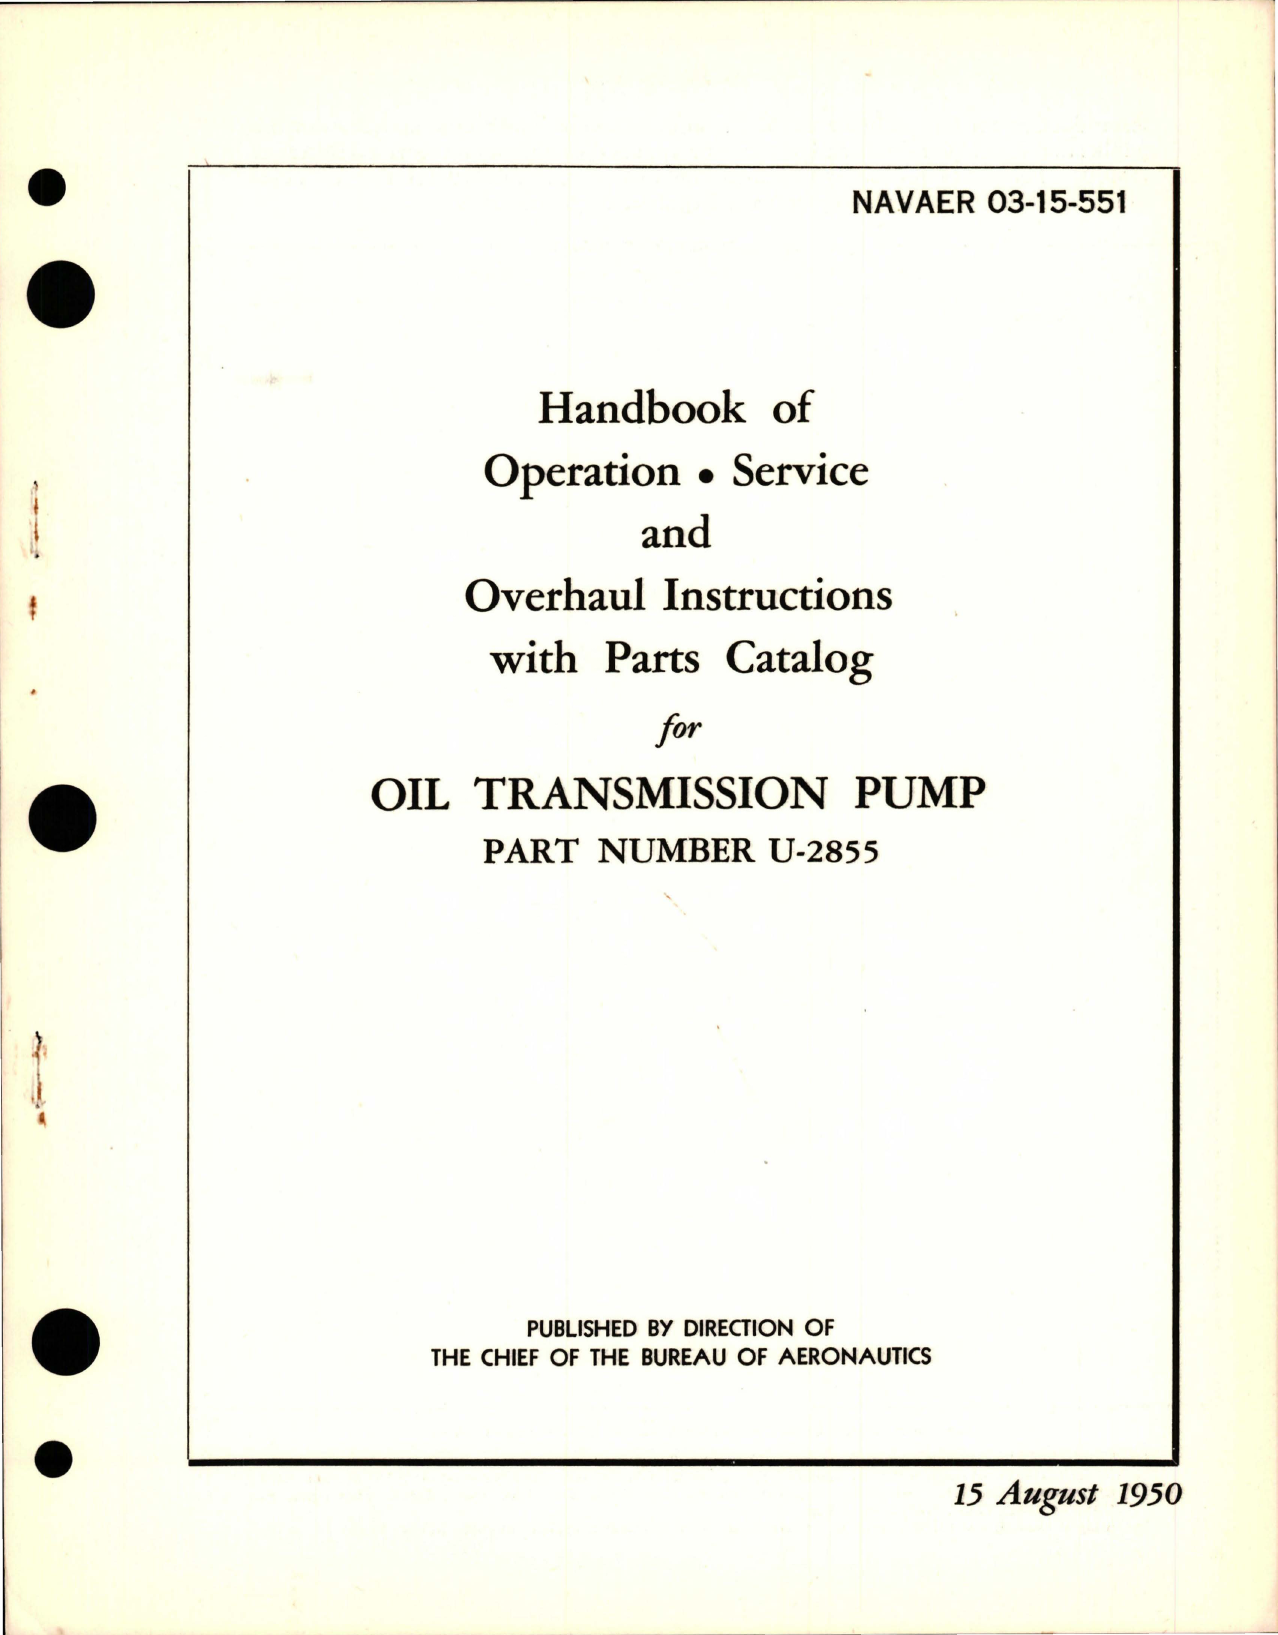 Sample page 1 from AirCorps Library document: Operation, Service, Overhaul Instructions with Parts Catalog for Oil Transmission Pump - Part U-2855 